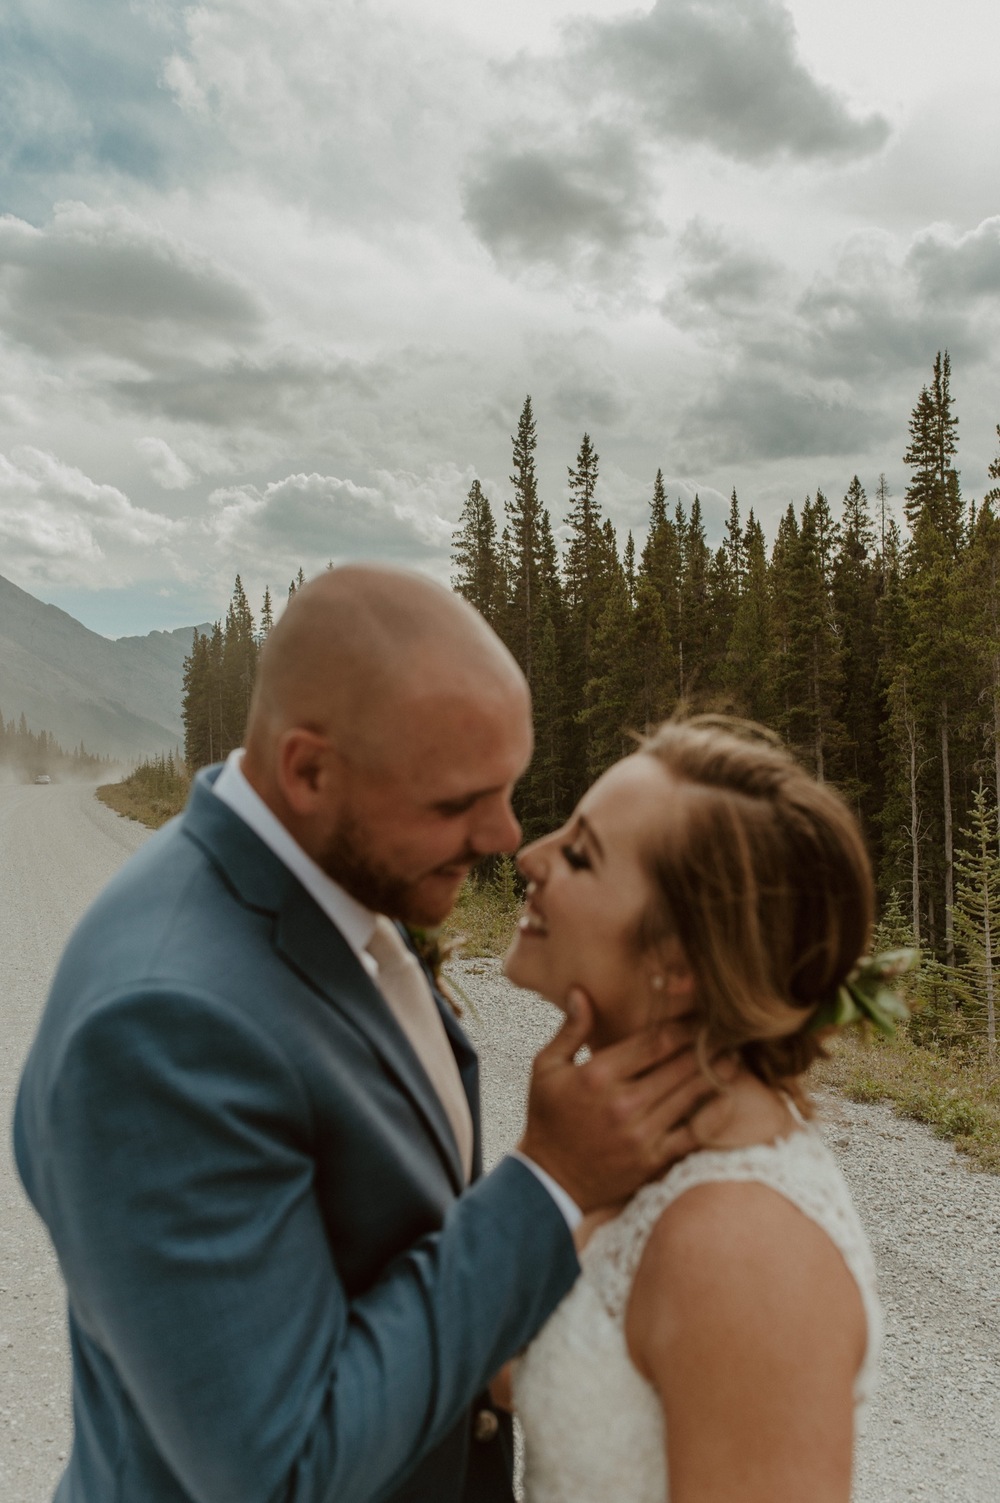 The bride and groom taking in each other moments before their ceremony on a dirt mountain road in Kananaskis Alberta